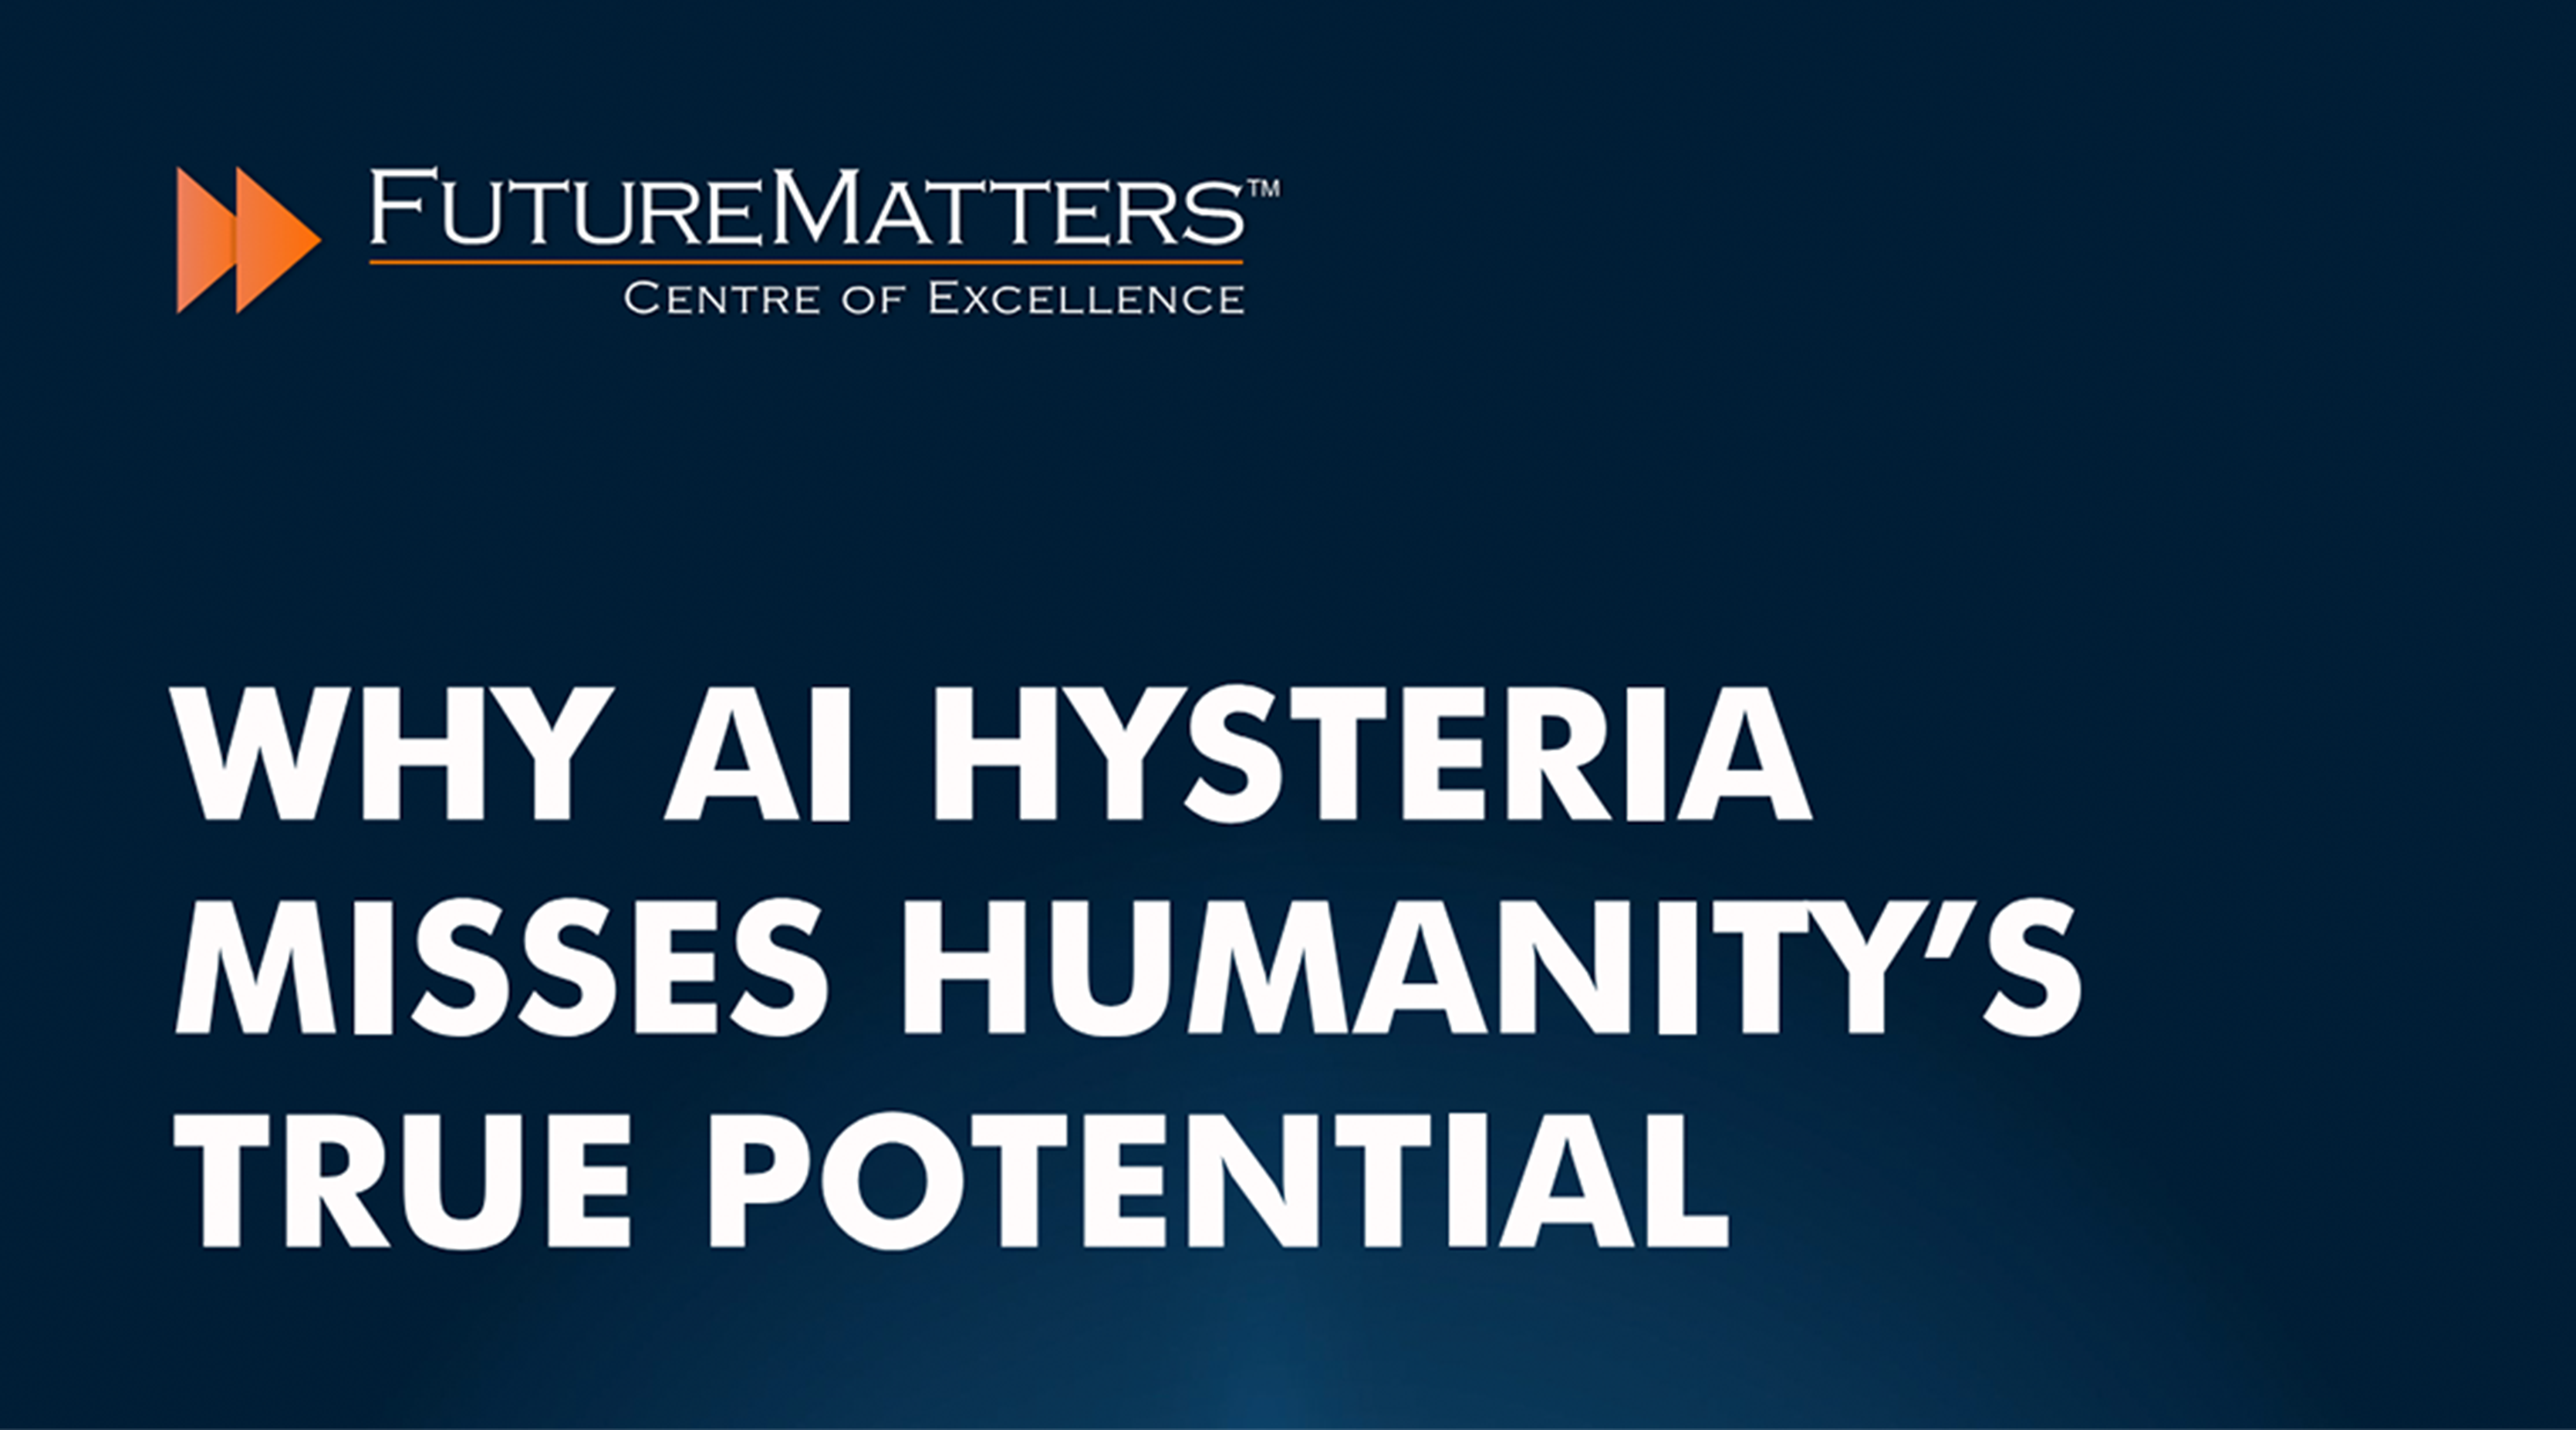 AI Hysteria is Missing the Point